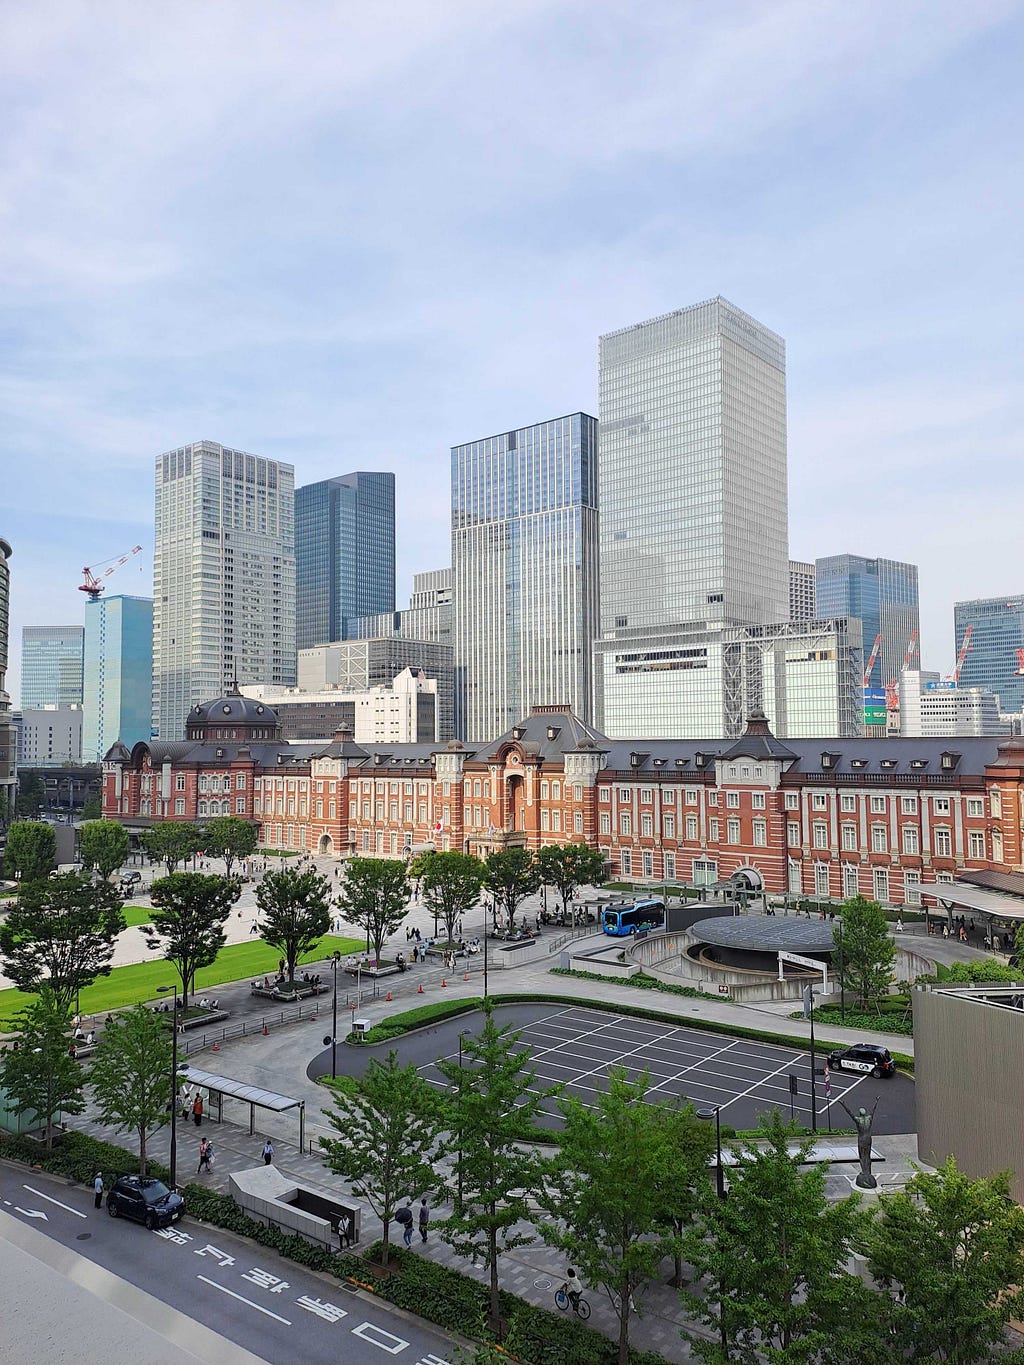 Tokyo station from a nearby building